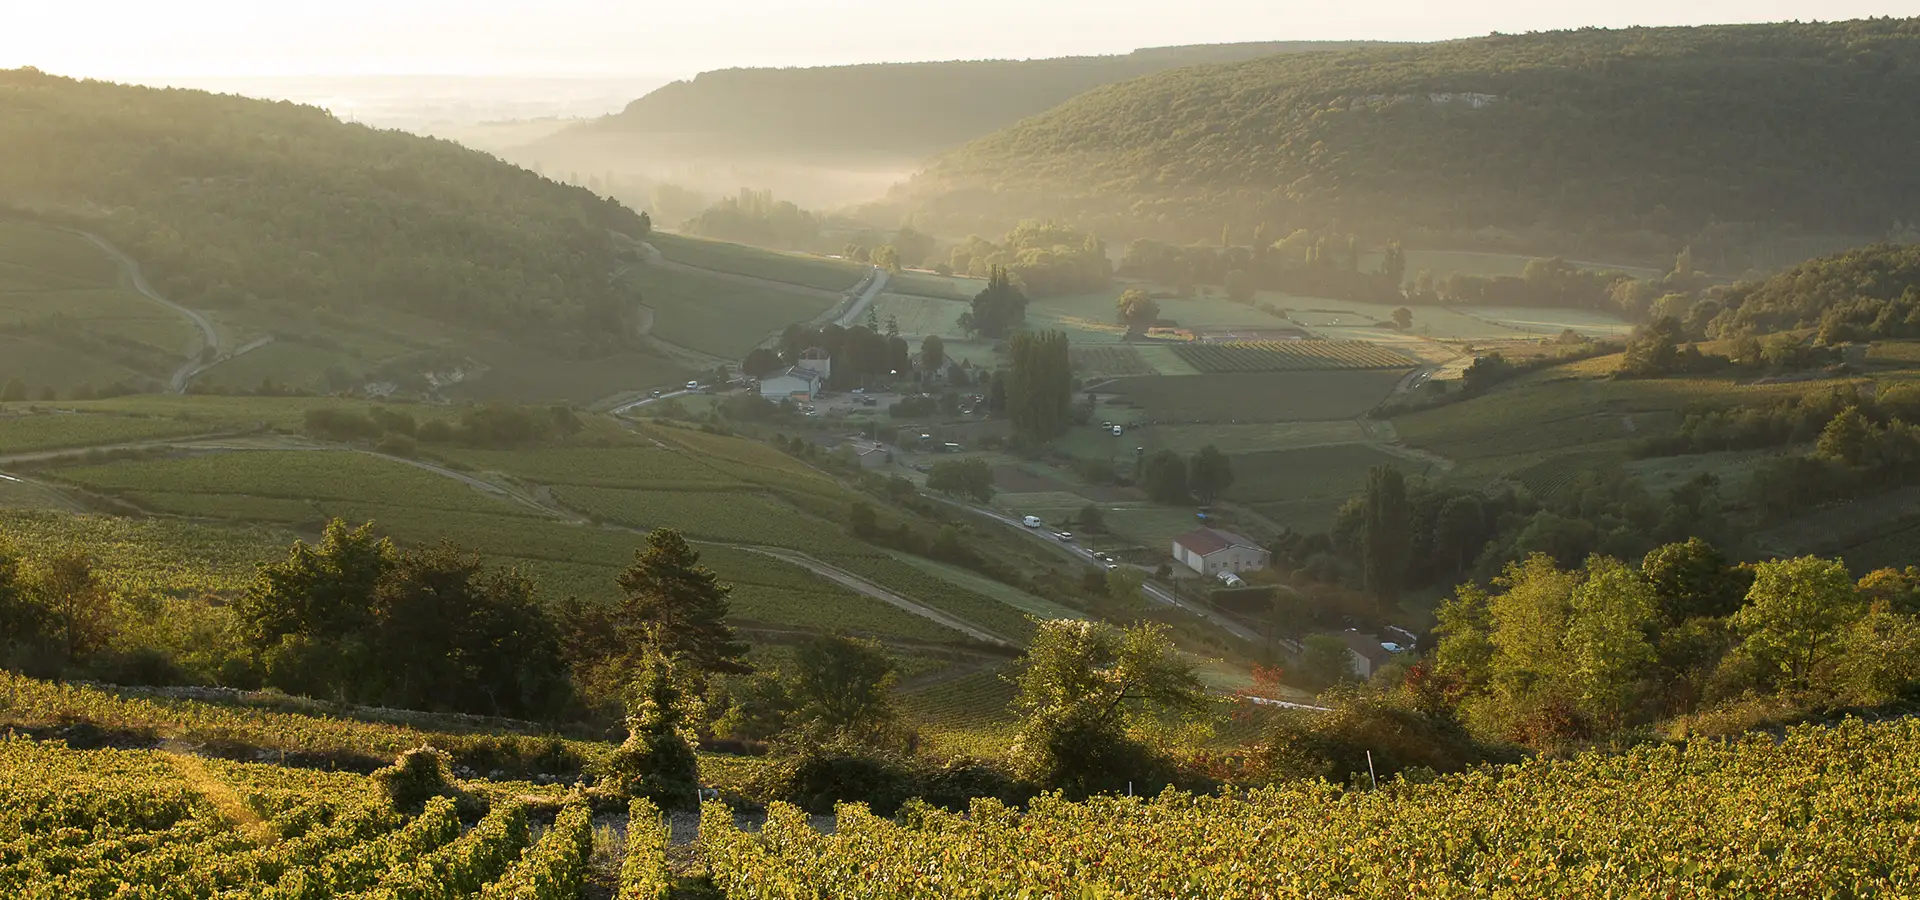 Chagny, France: <strong>The 7 best restaurants</strong>